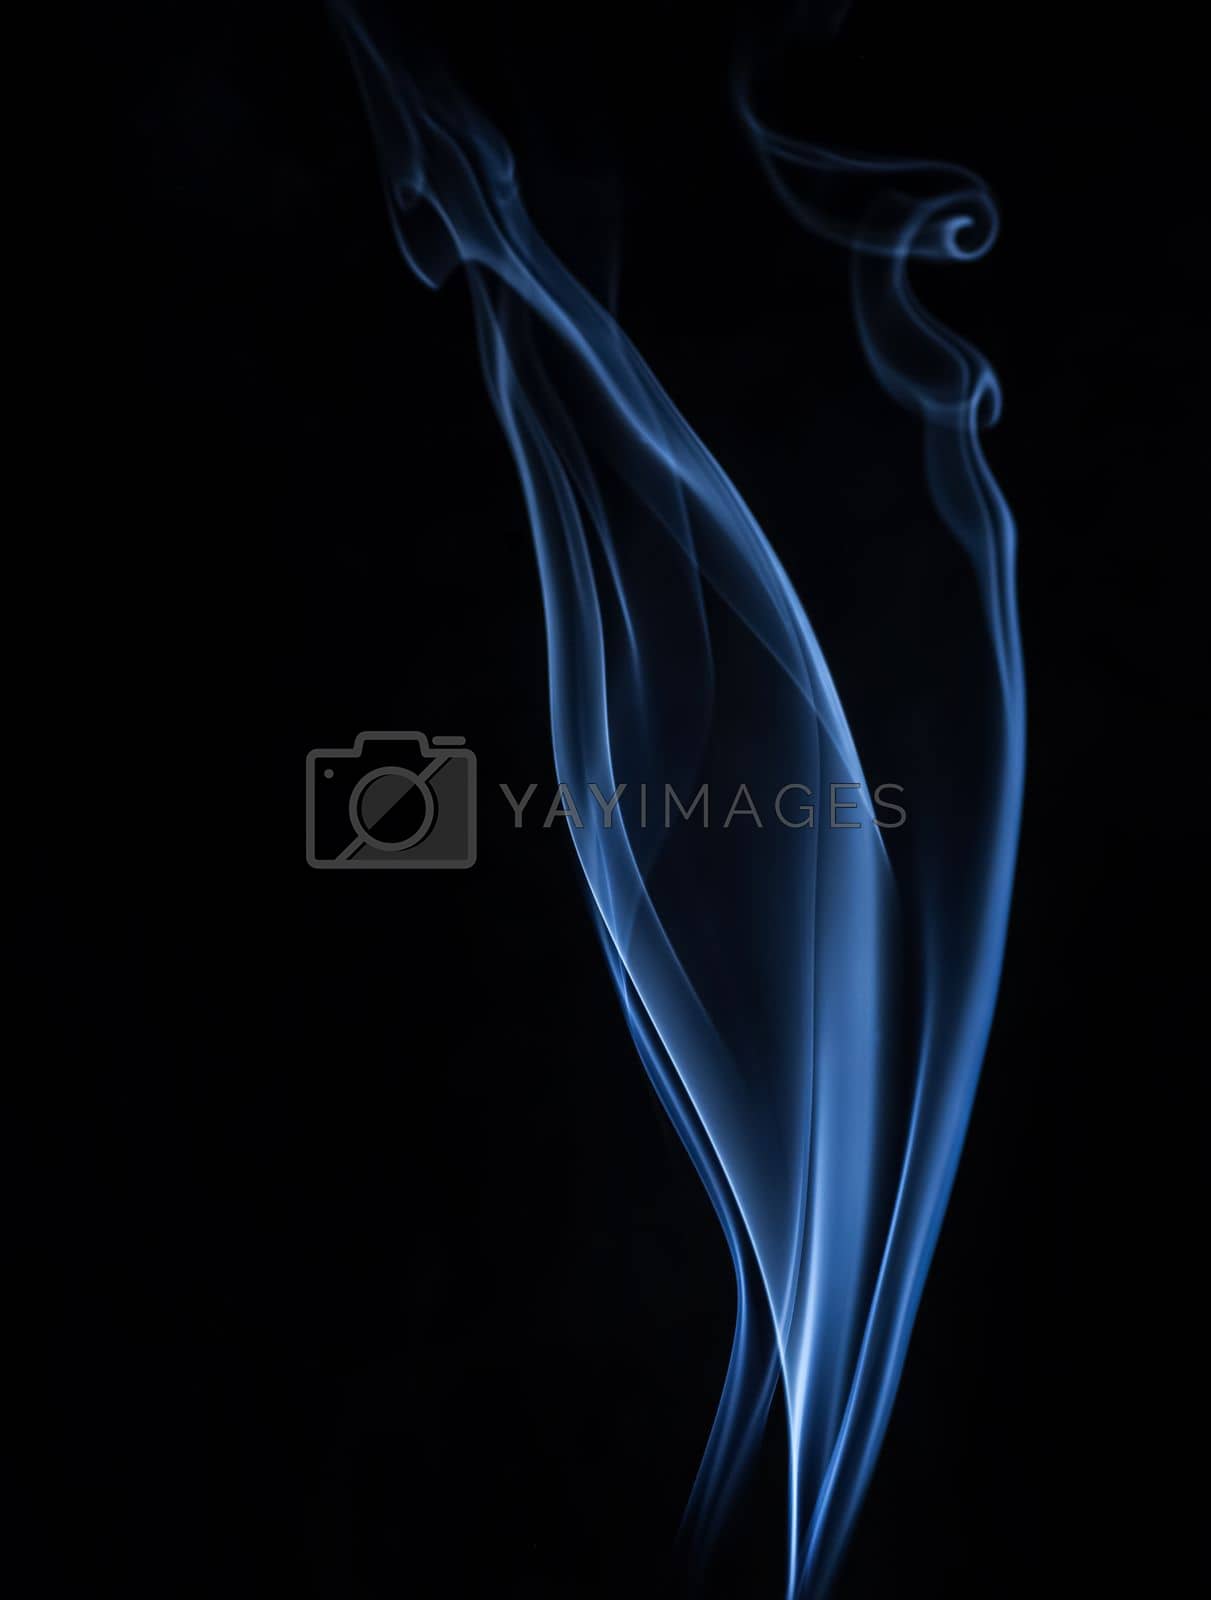 Royalty free image of Black Background with Blue Smoke by Anna_Omelchenko